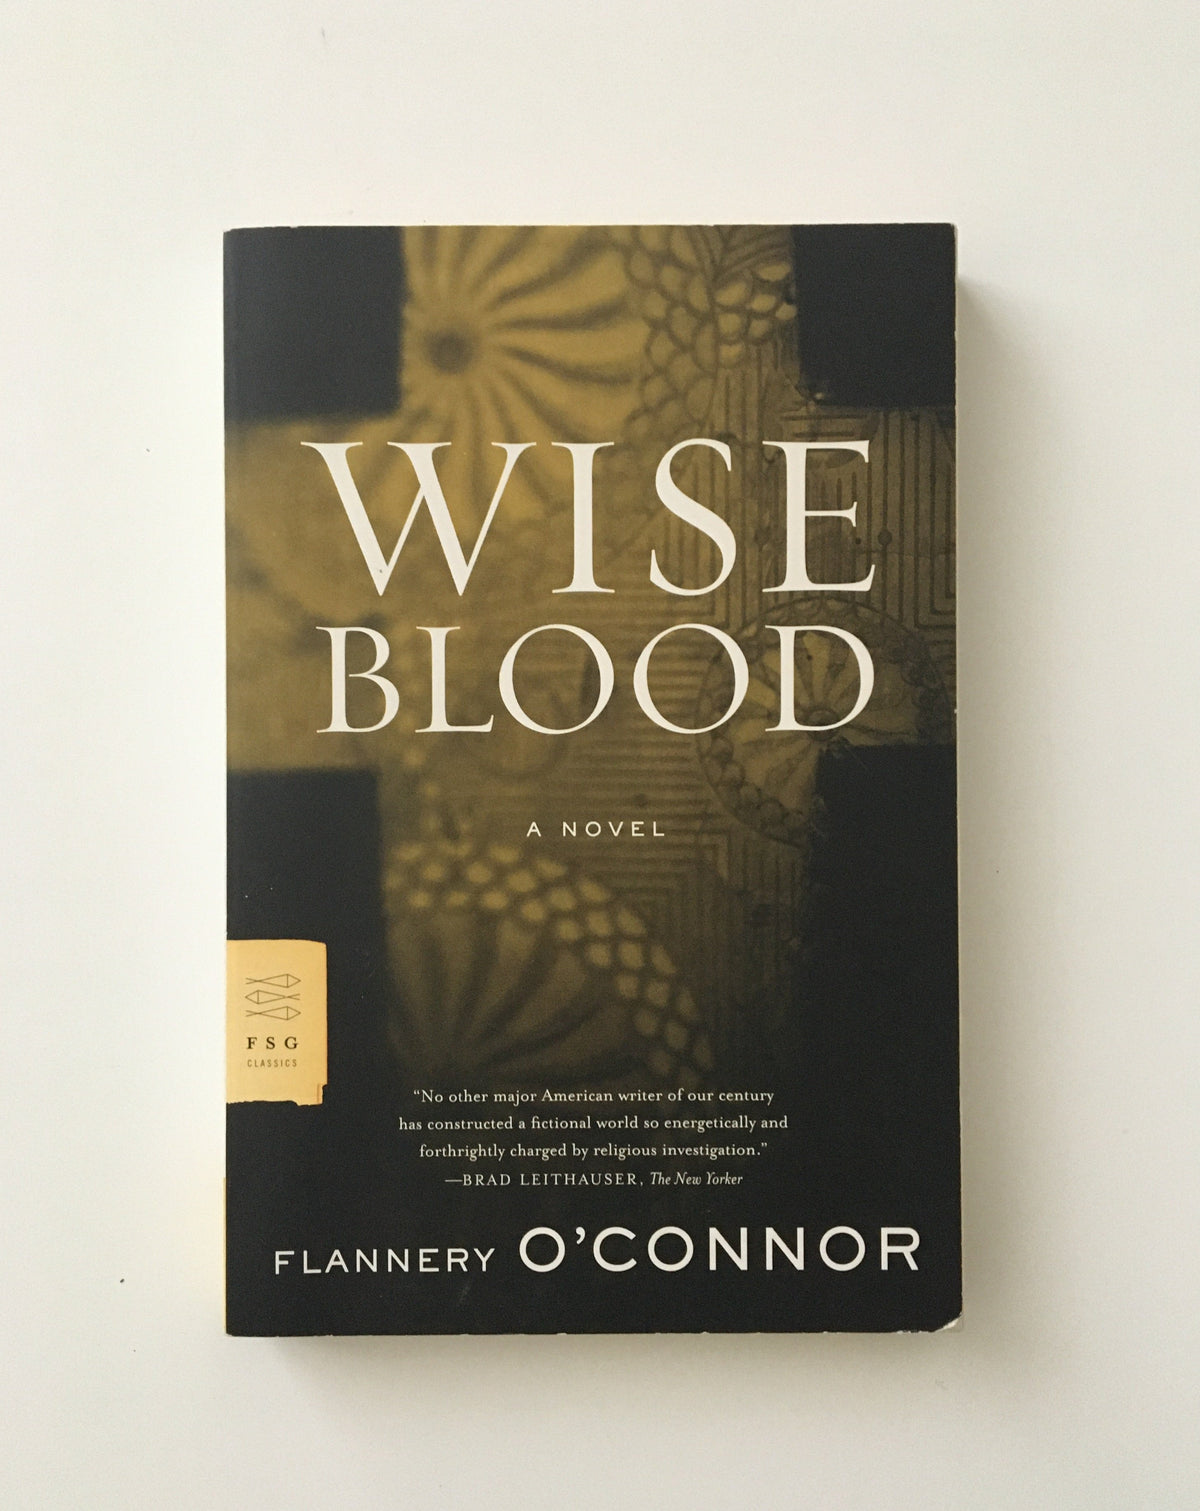 Wise Blood by Flannery O&#39;Connor, book, Ten Dollar Books, Ten Dollar Books